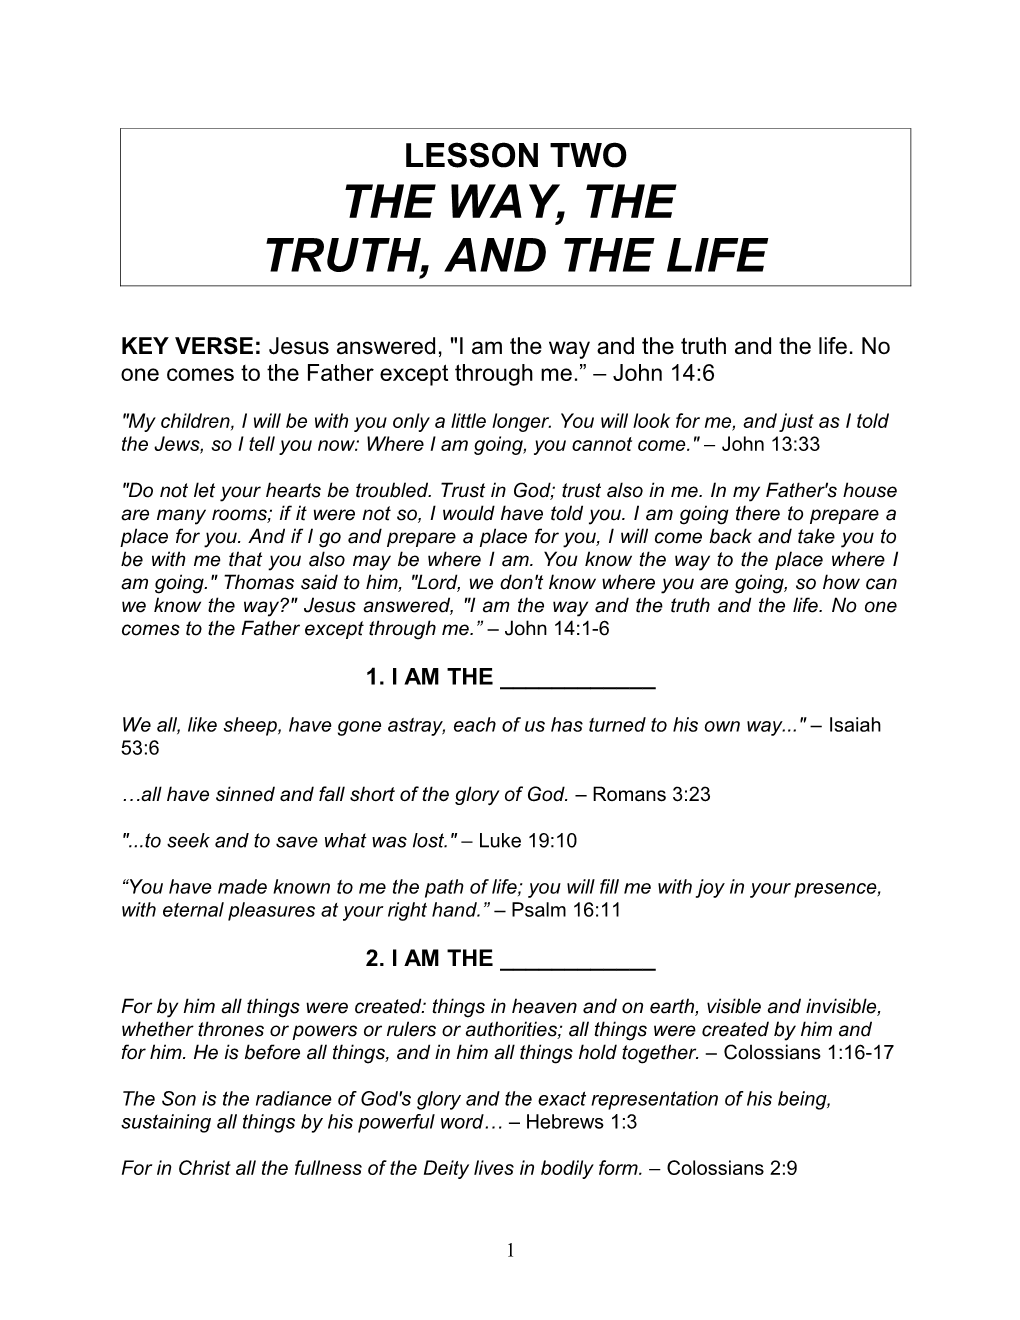 KEY VERSE: Jesus Answered, I Am the Way and the Truth and the Life. No One Comes to The